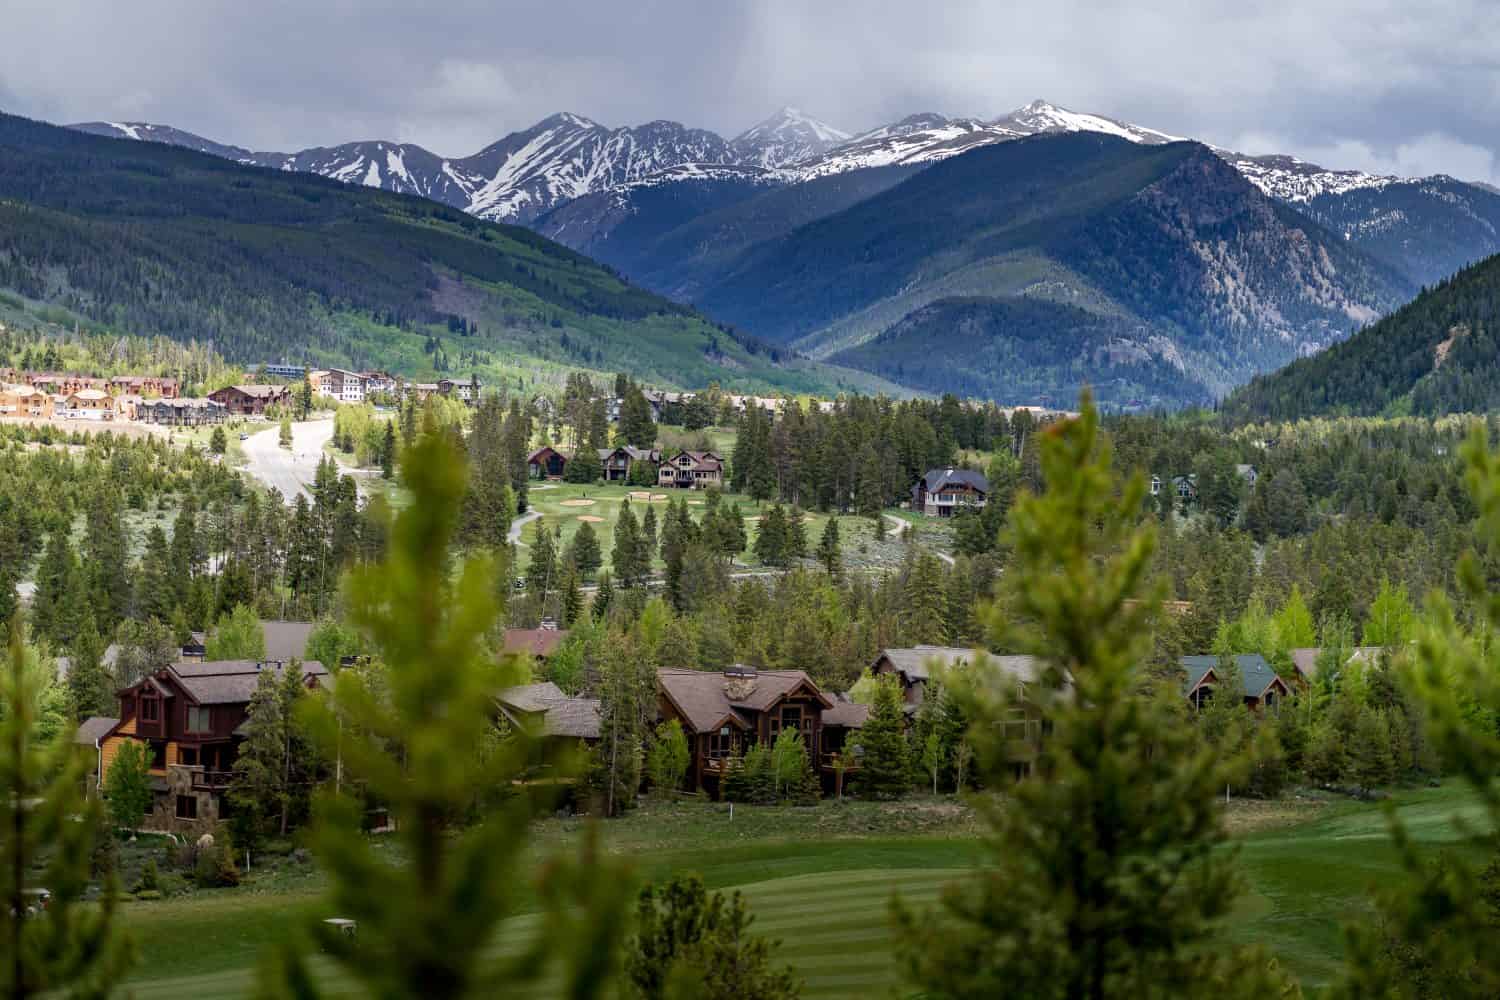 Overlooking the keystone golf course with views of Keystone Colorado and the mountains to the east while mountain biking the soda creek trail.